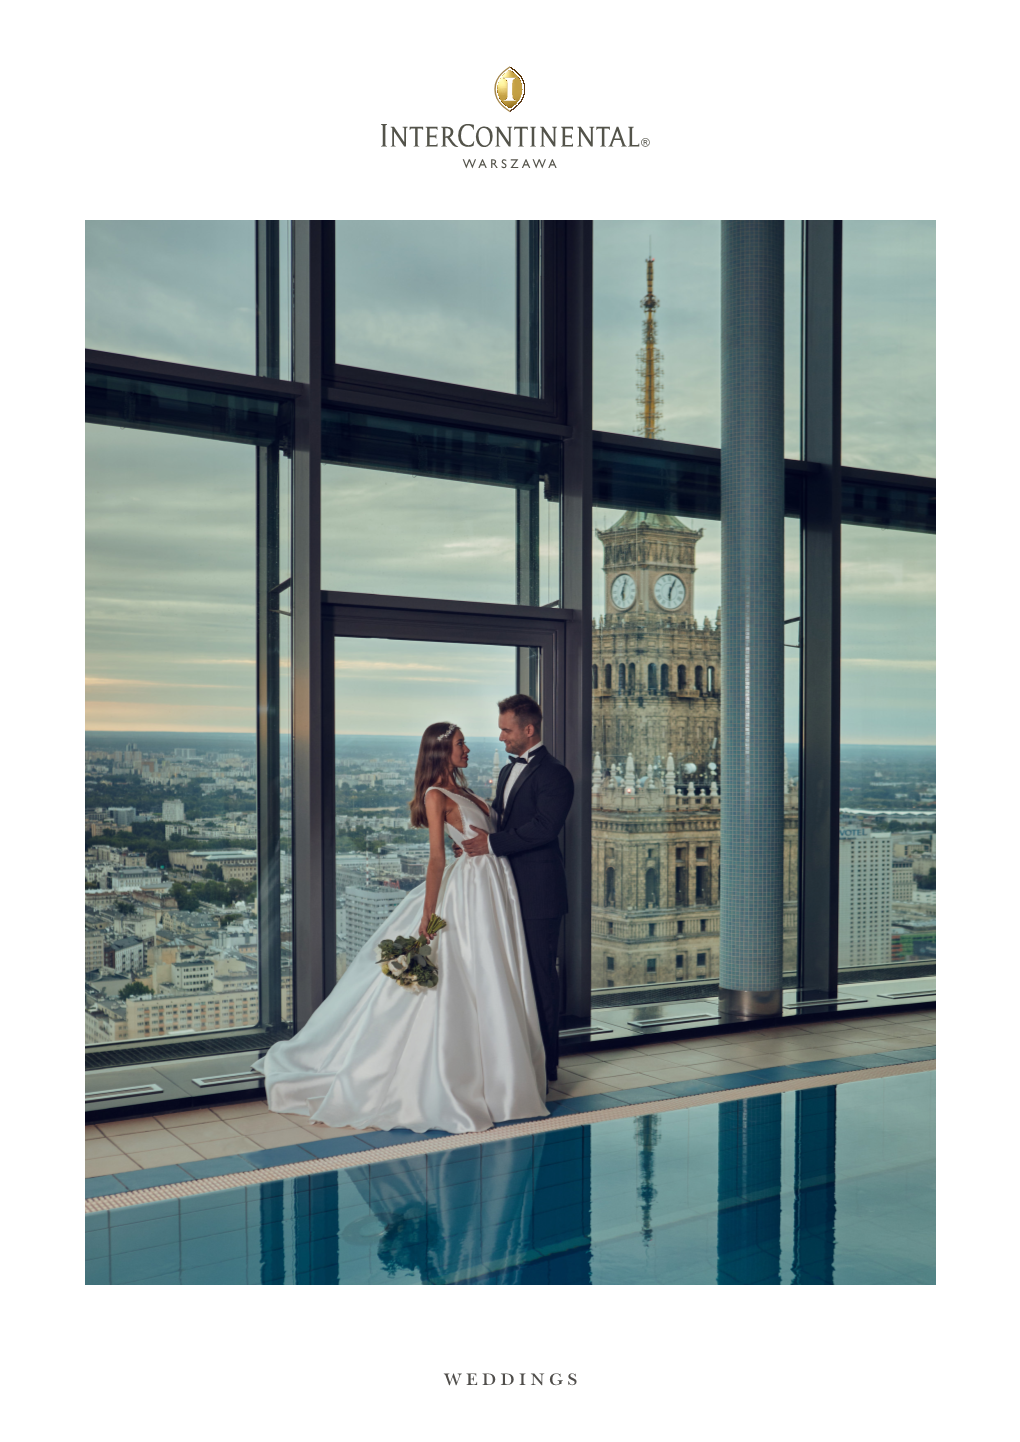 Weddings Welcome to Intercontinental Warsaw